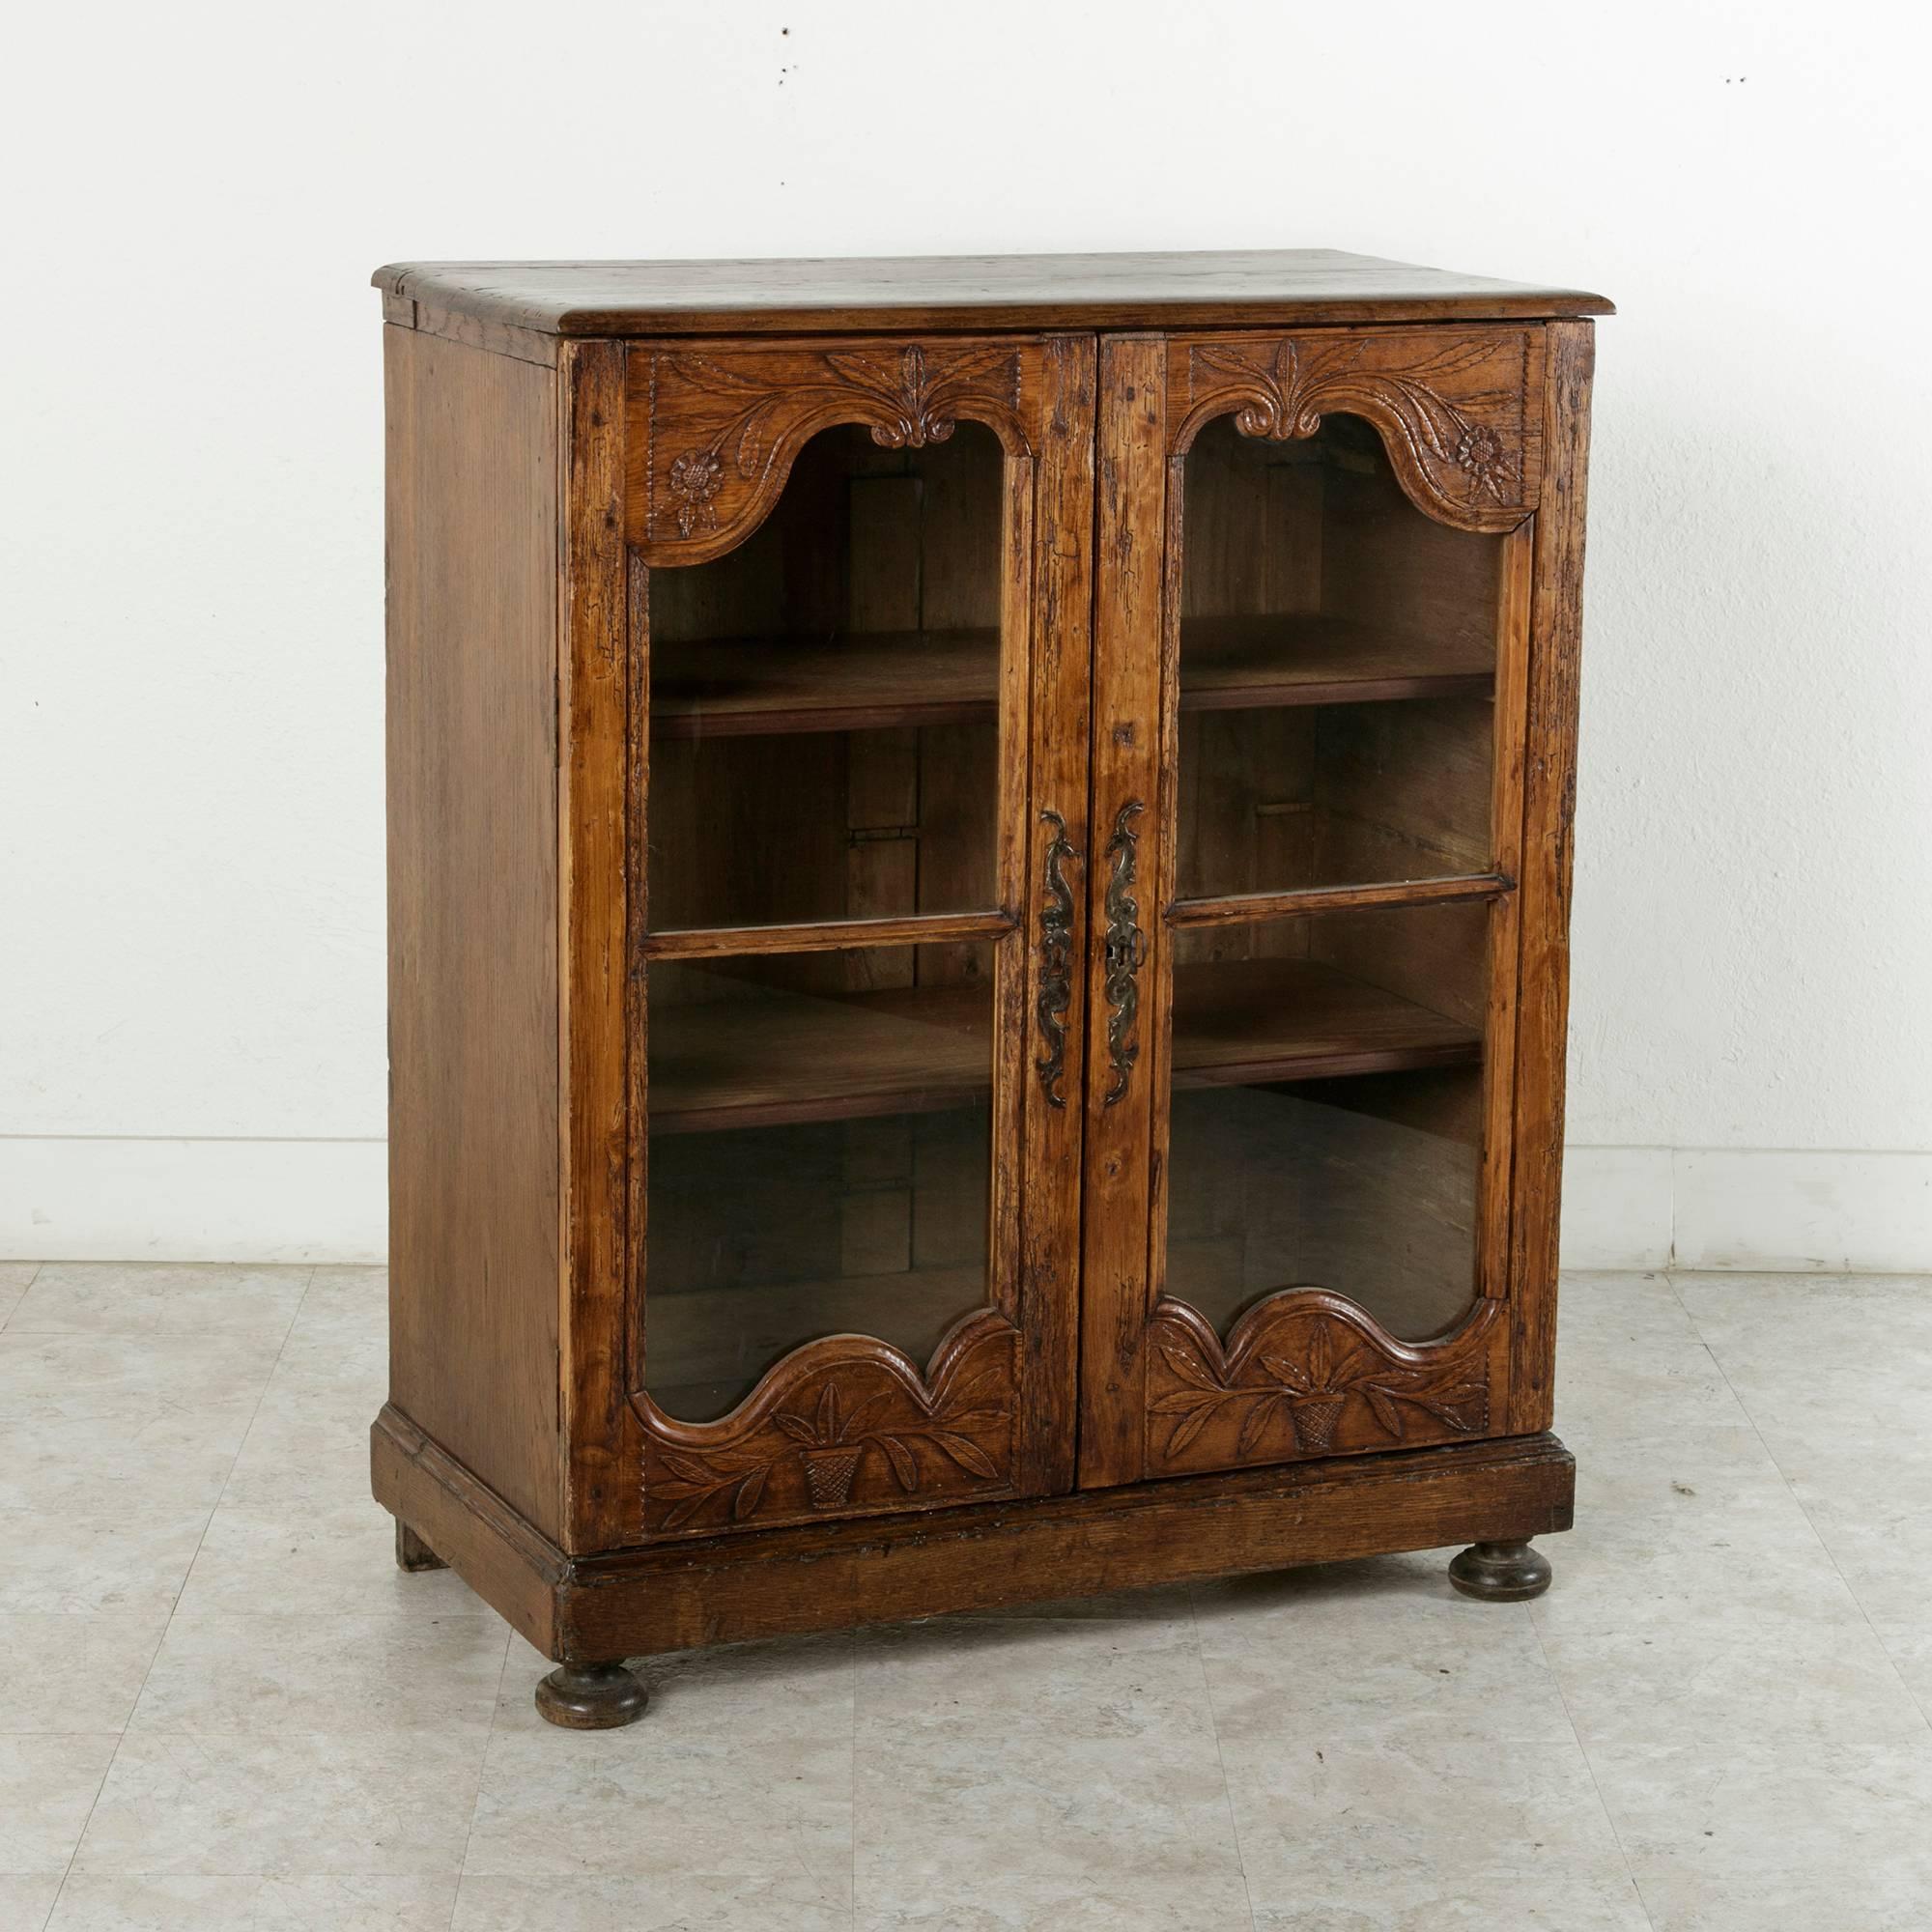 Artisan-made pieces of furniture from the French countryside often were created from a mixture of woods, depending on what was available in the region and on hand. This rustic vitrine features a hand-carved pine facade and an oak cabinet mounted on